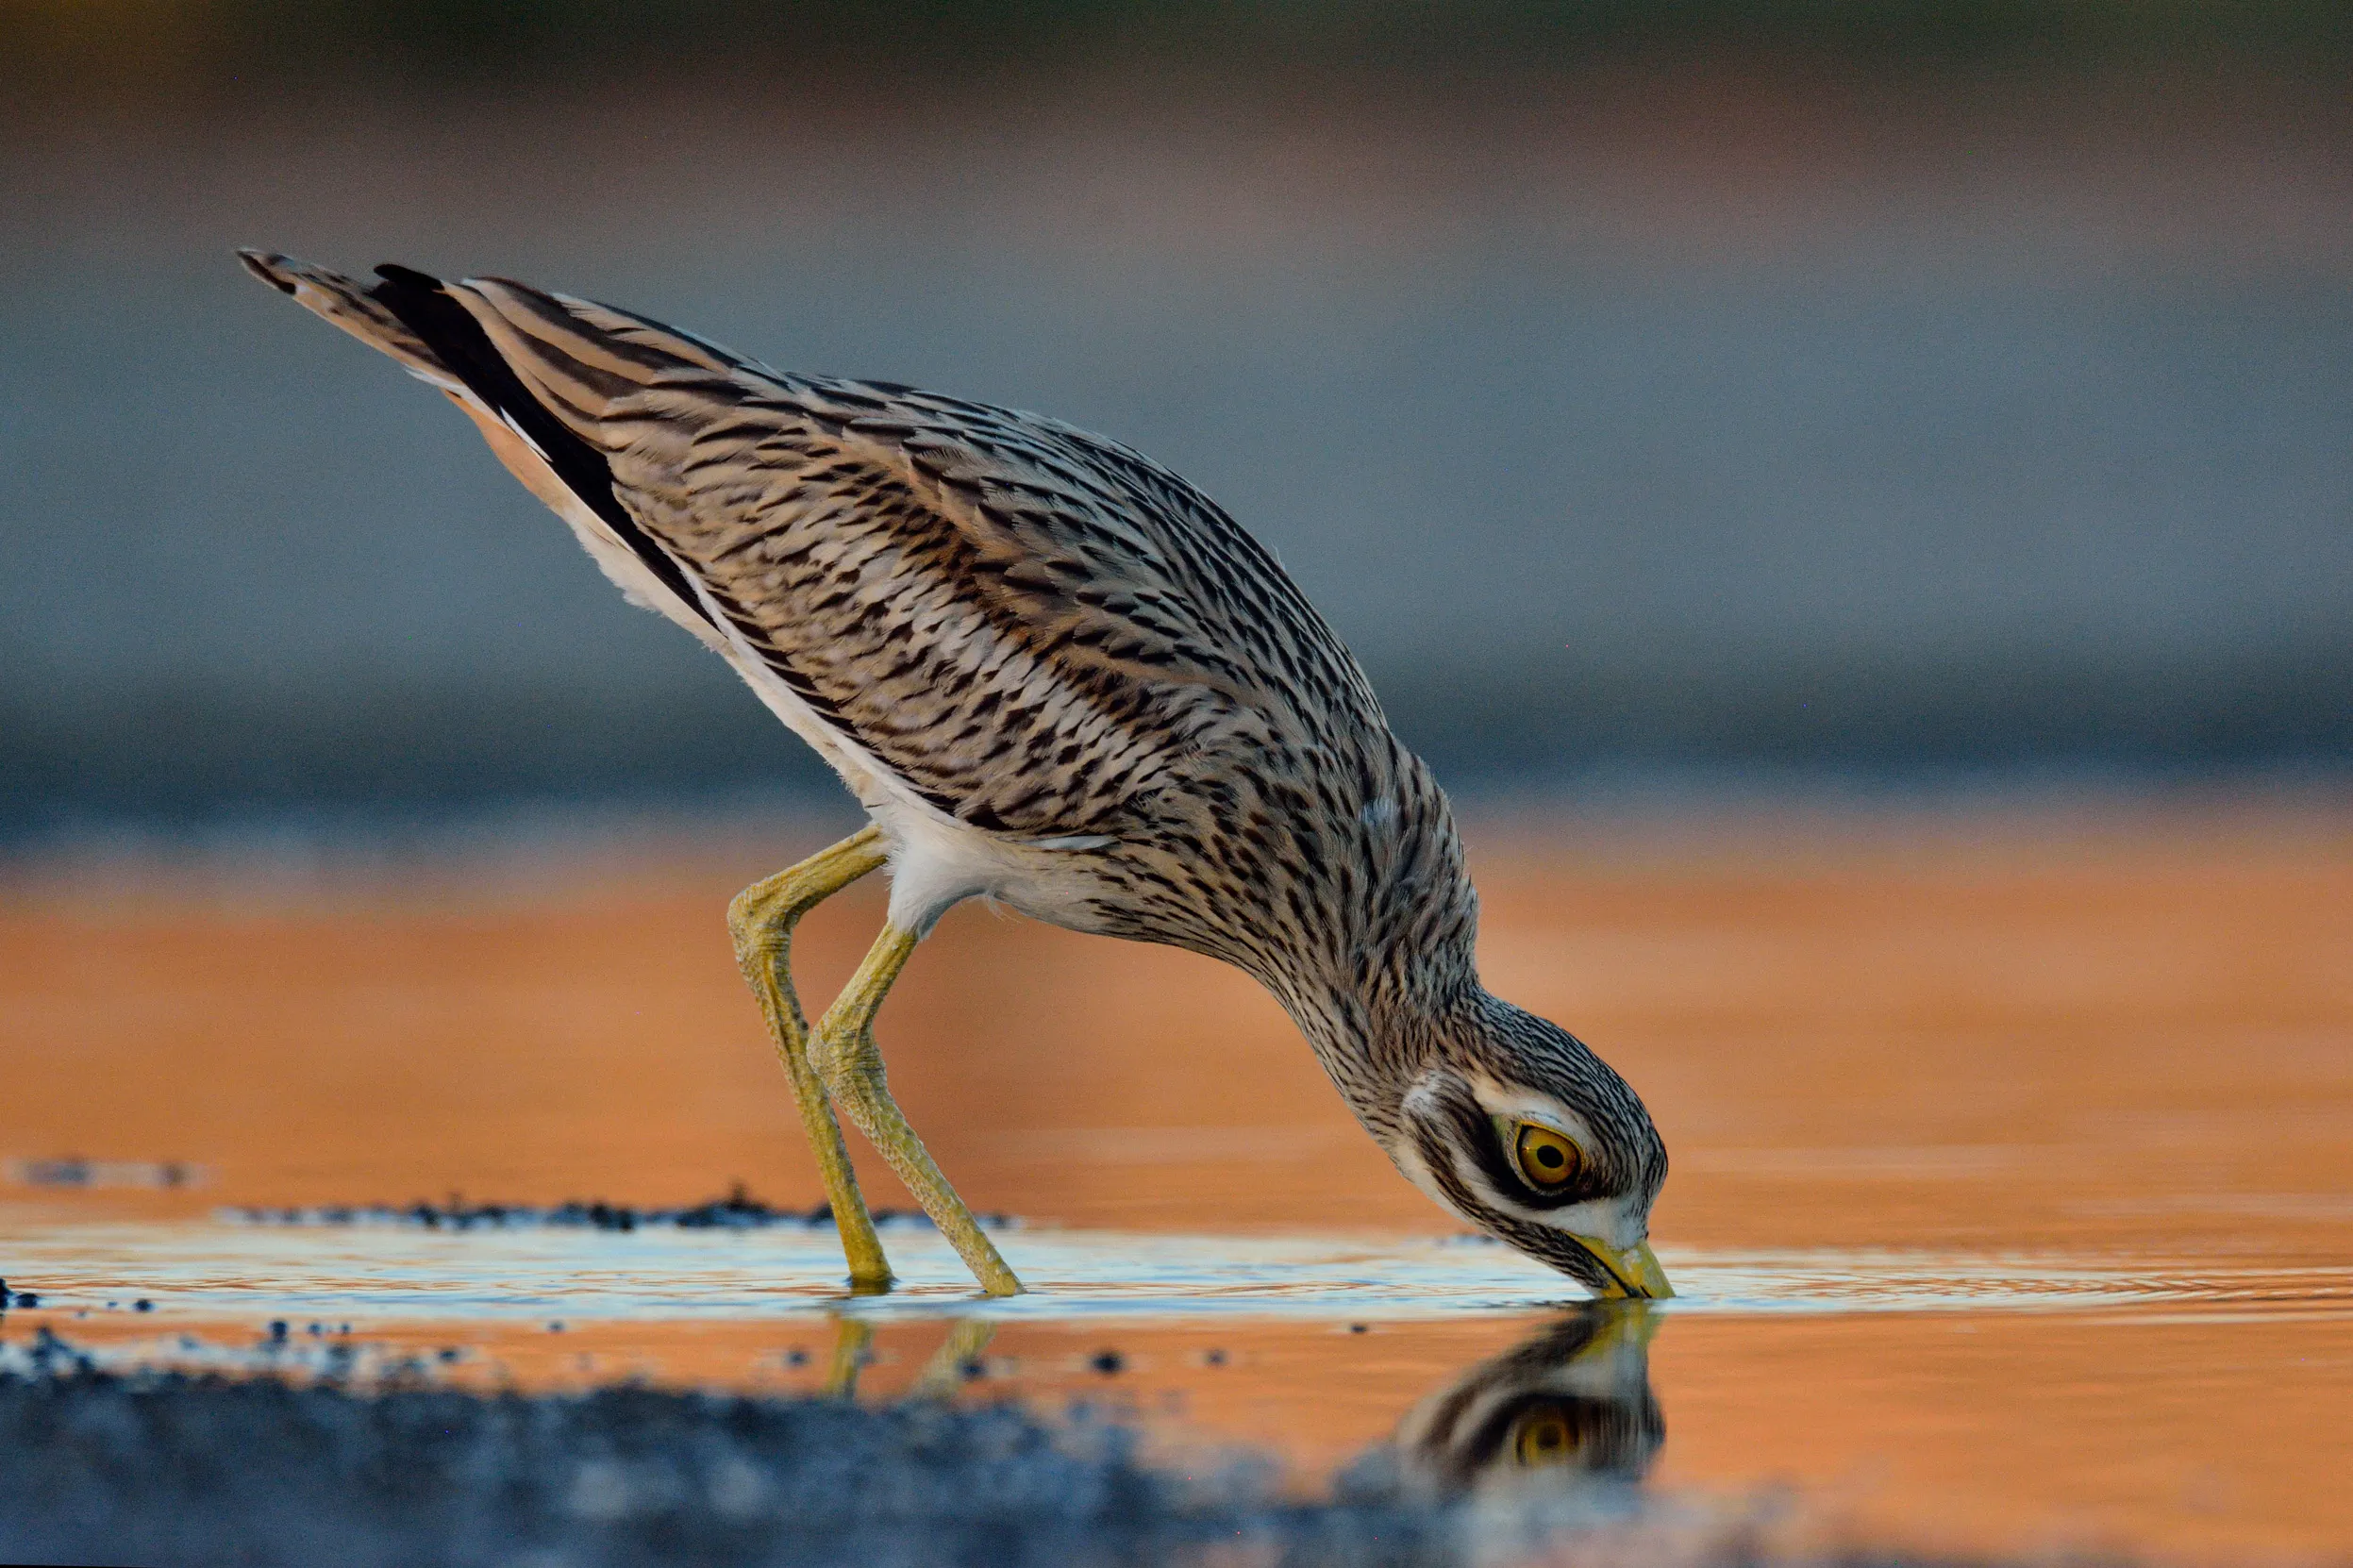 Lone Stone-curlew stood in shallow water, leant over to find food beneath the surface.